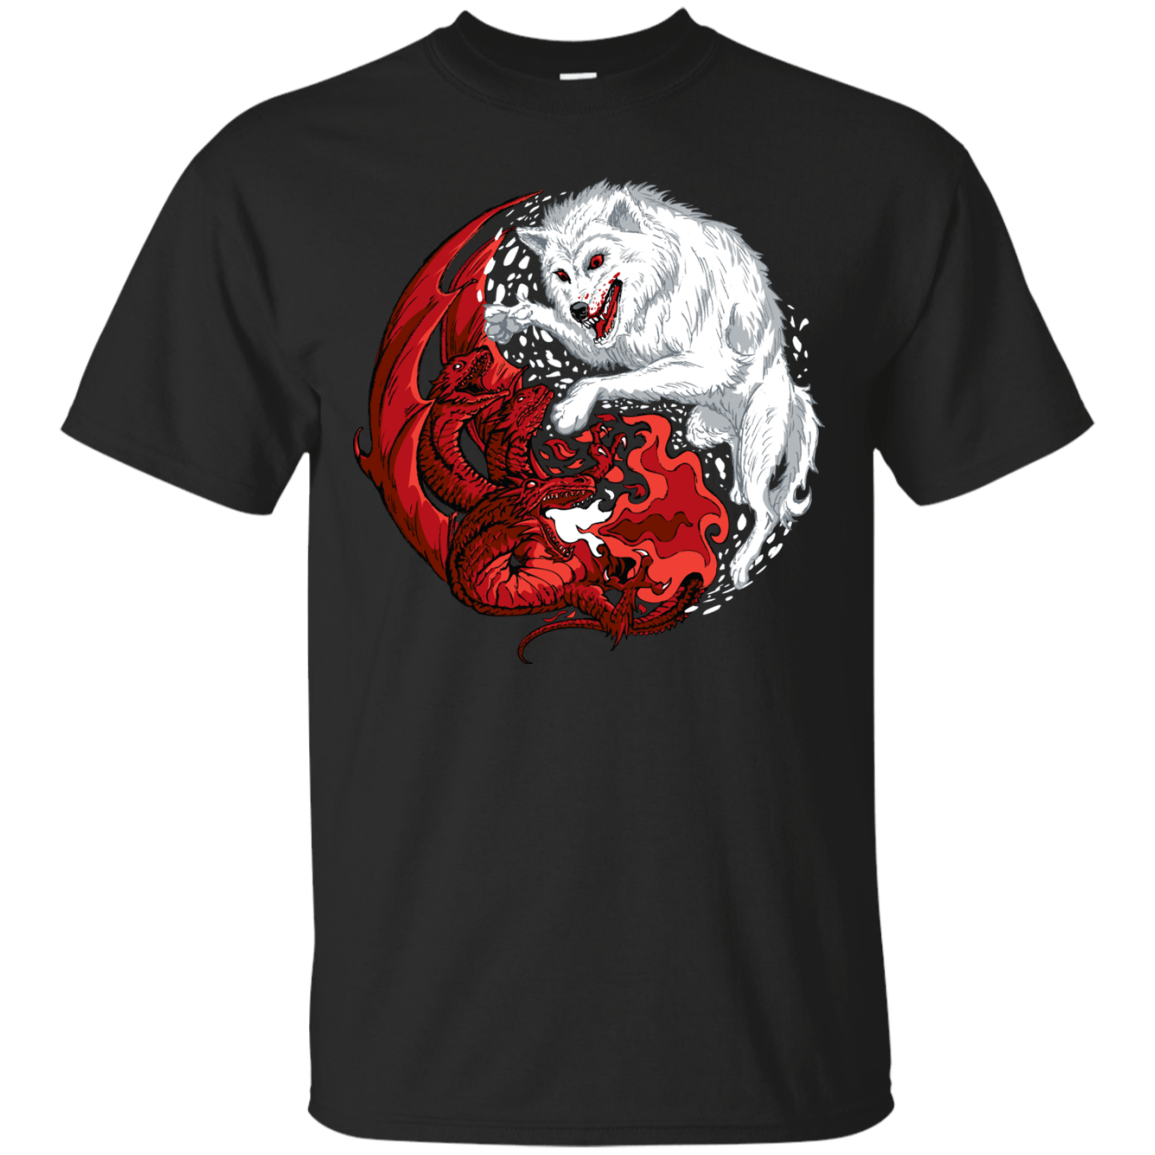 T-Shirts Black / Small Ice and Fire T-Shirt